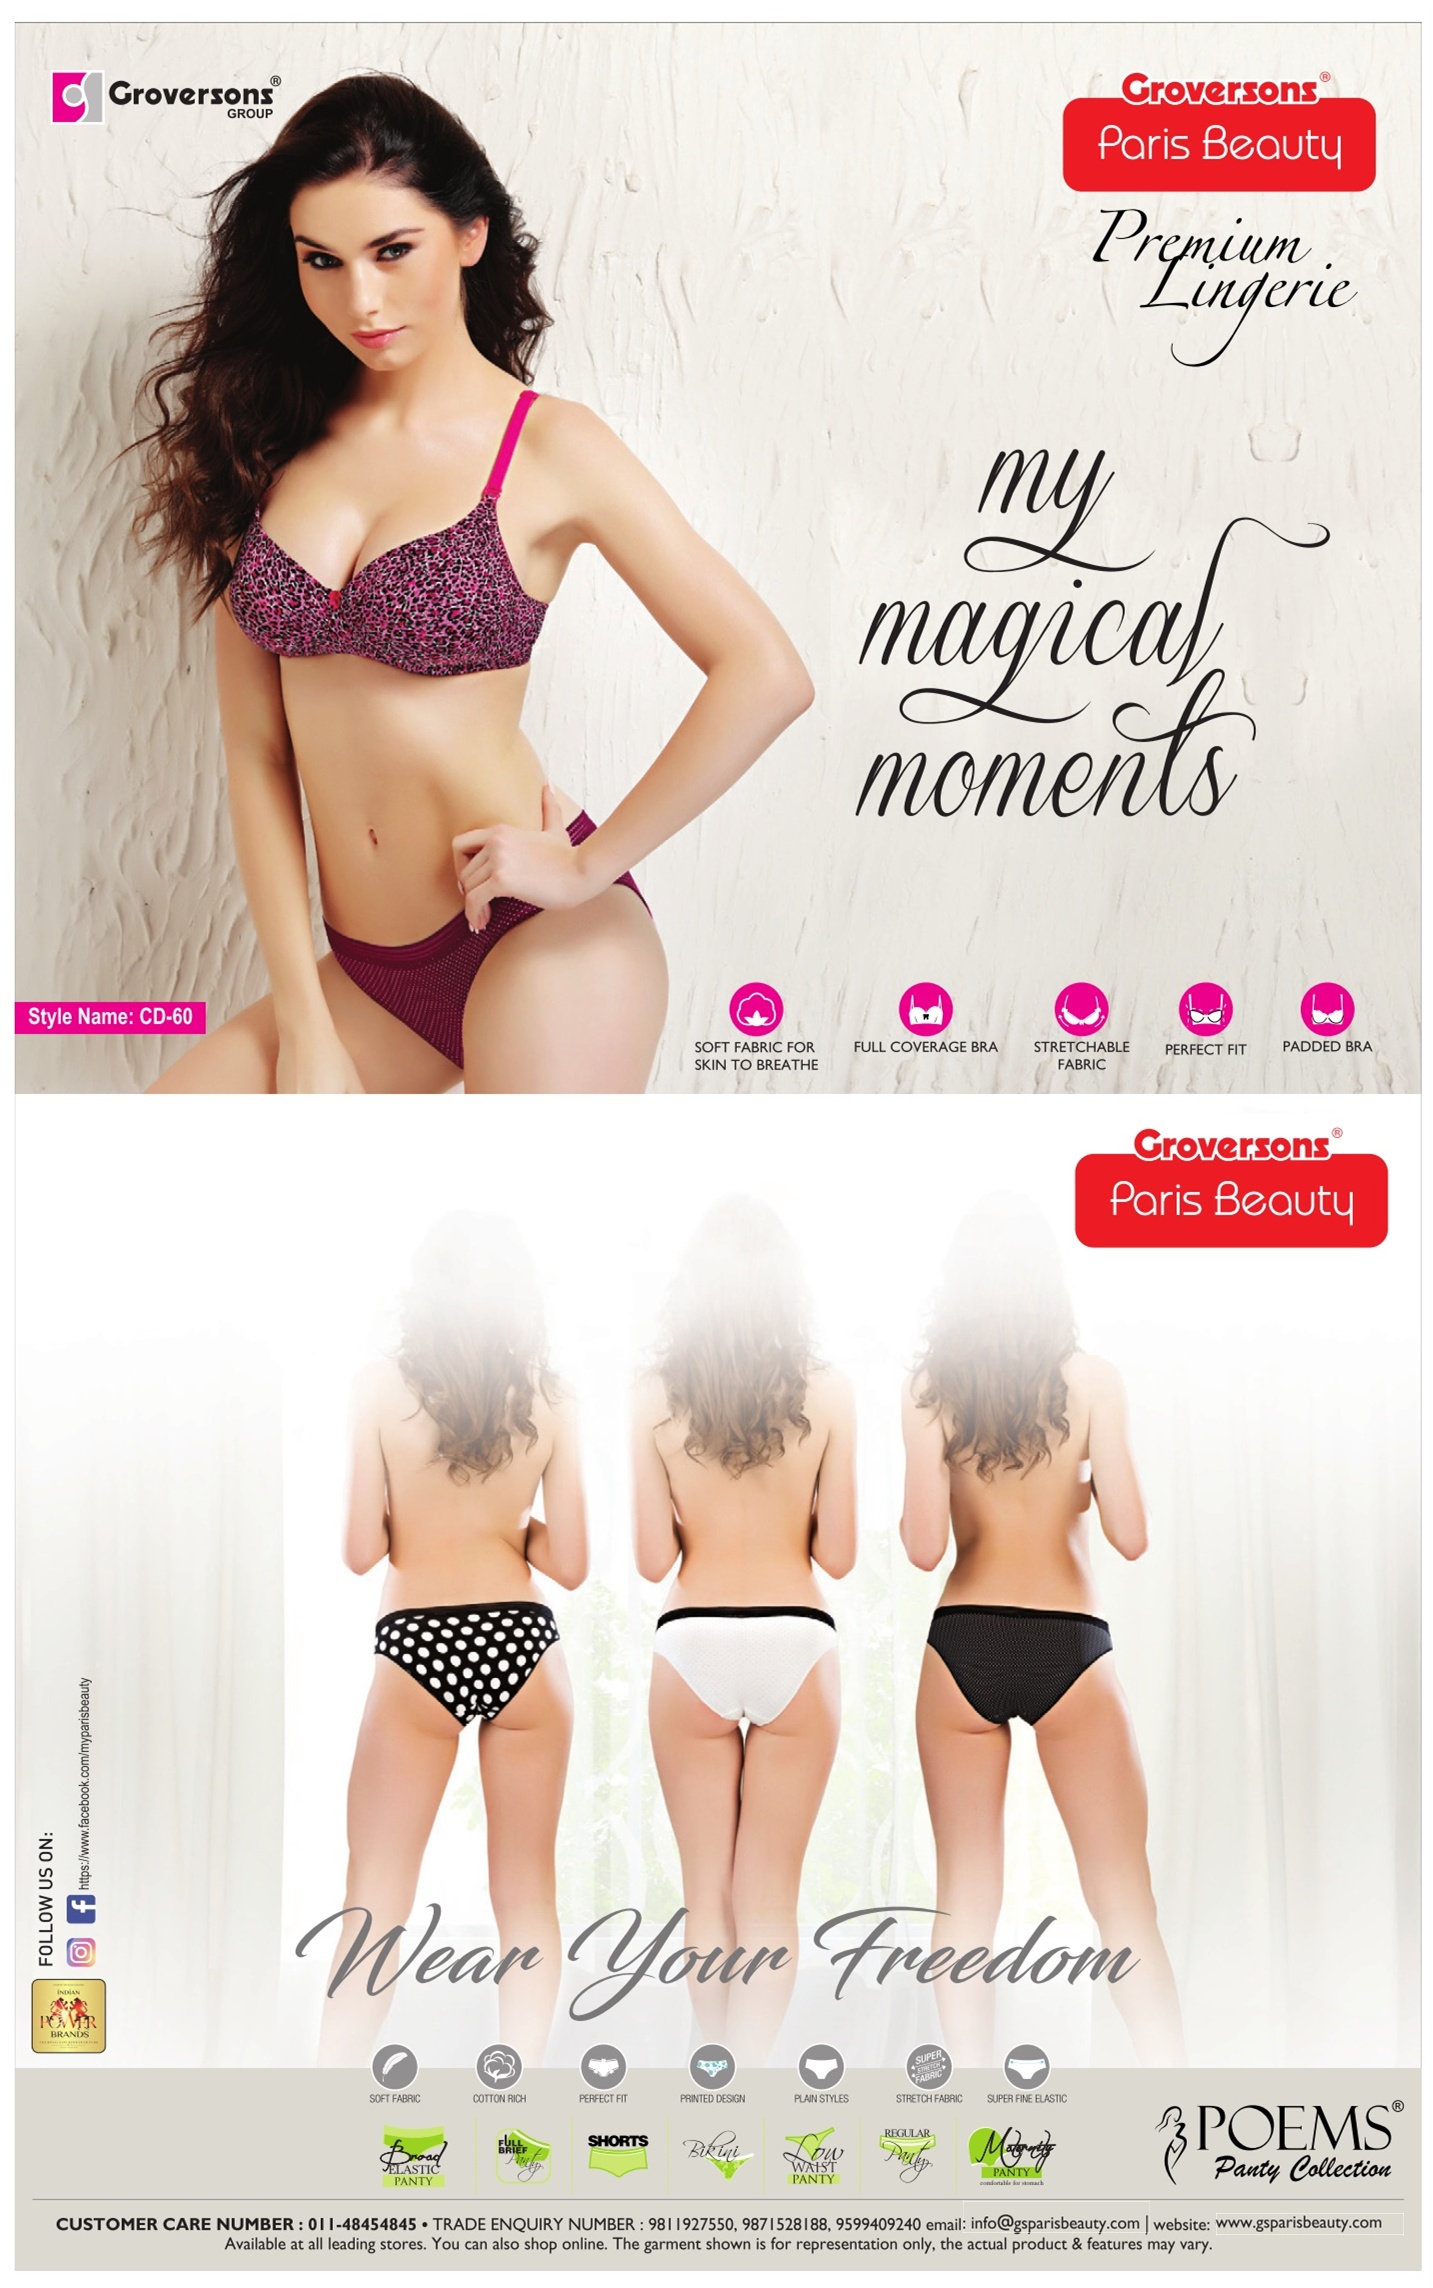 How to advertise an online lingerie store?